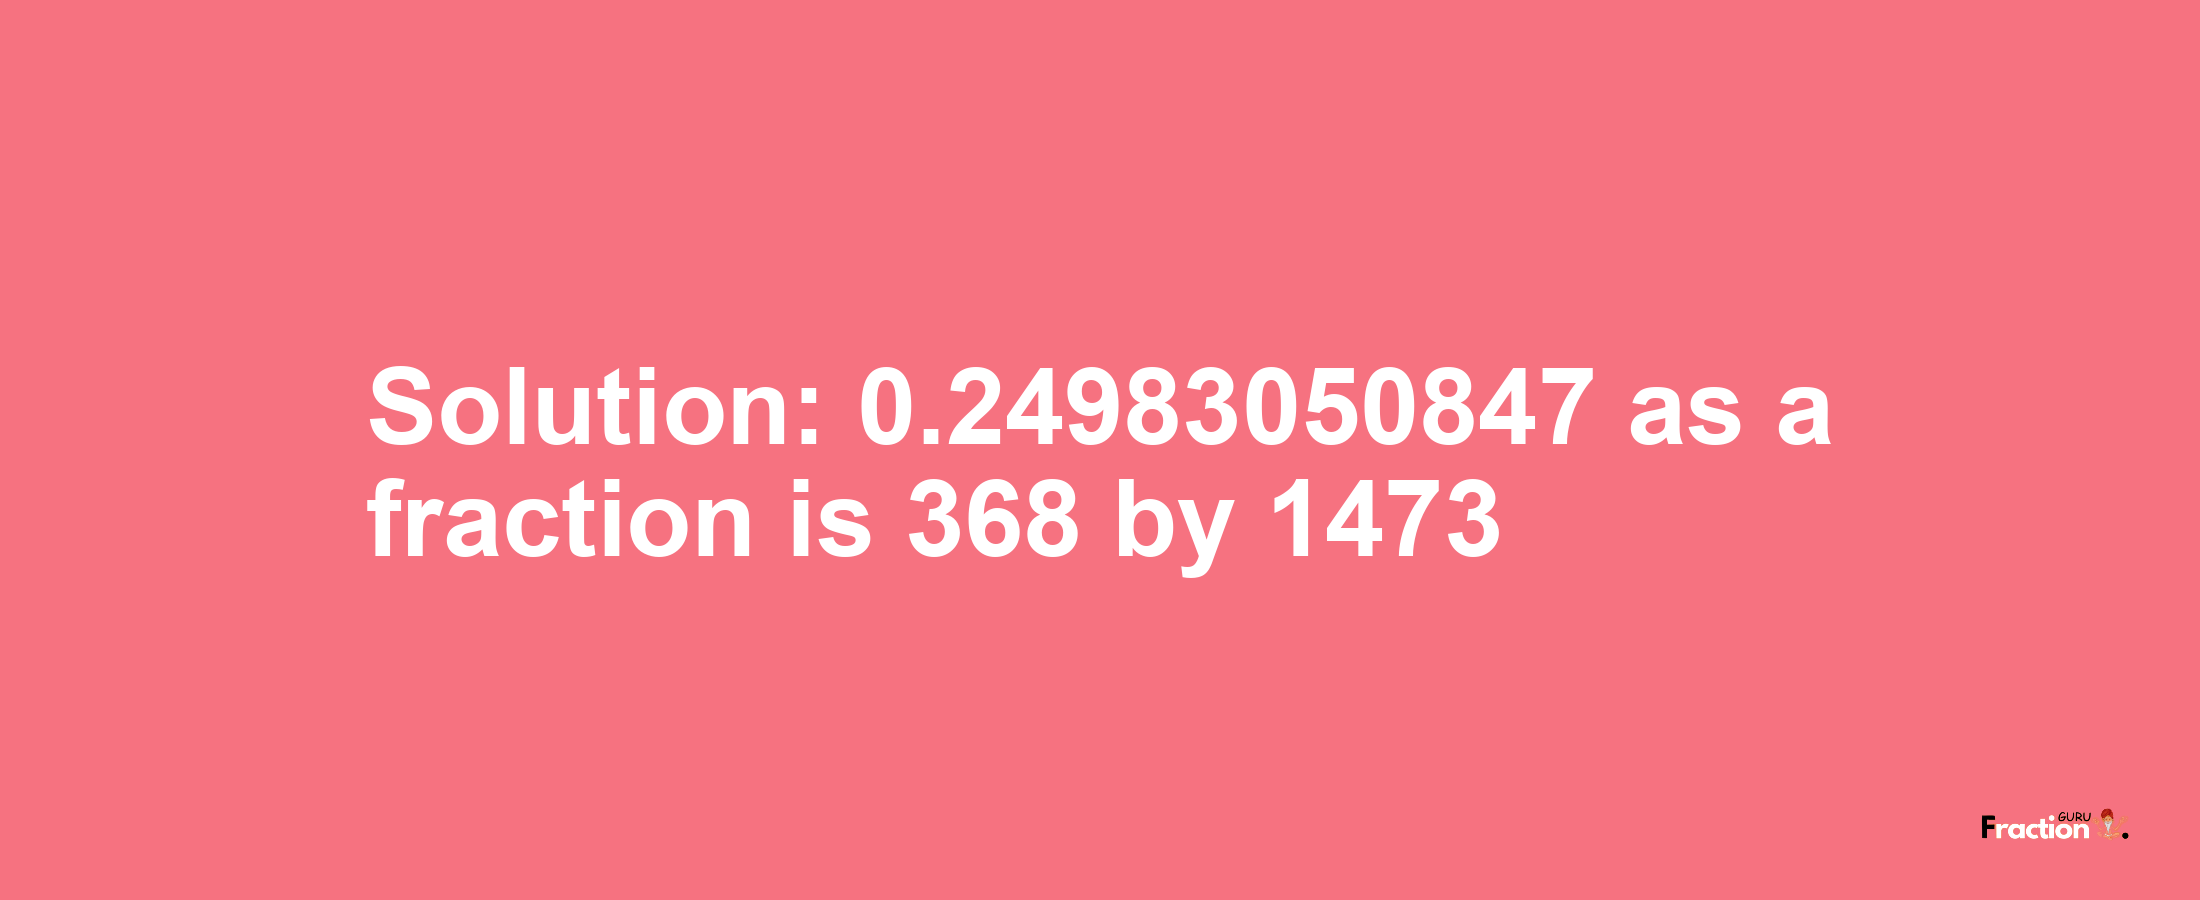 Solution:0.24983050847 as a fraction is 368/1473